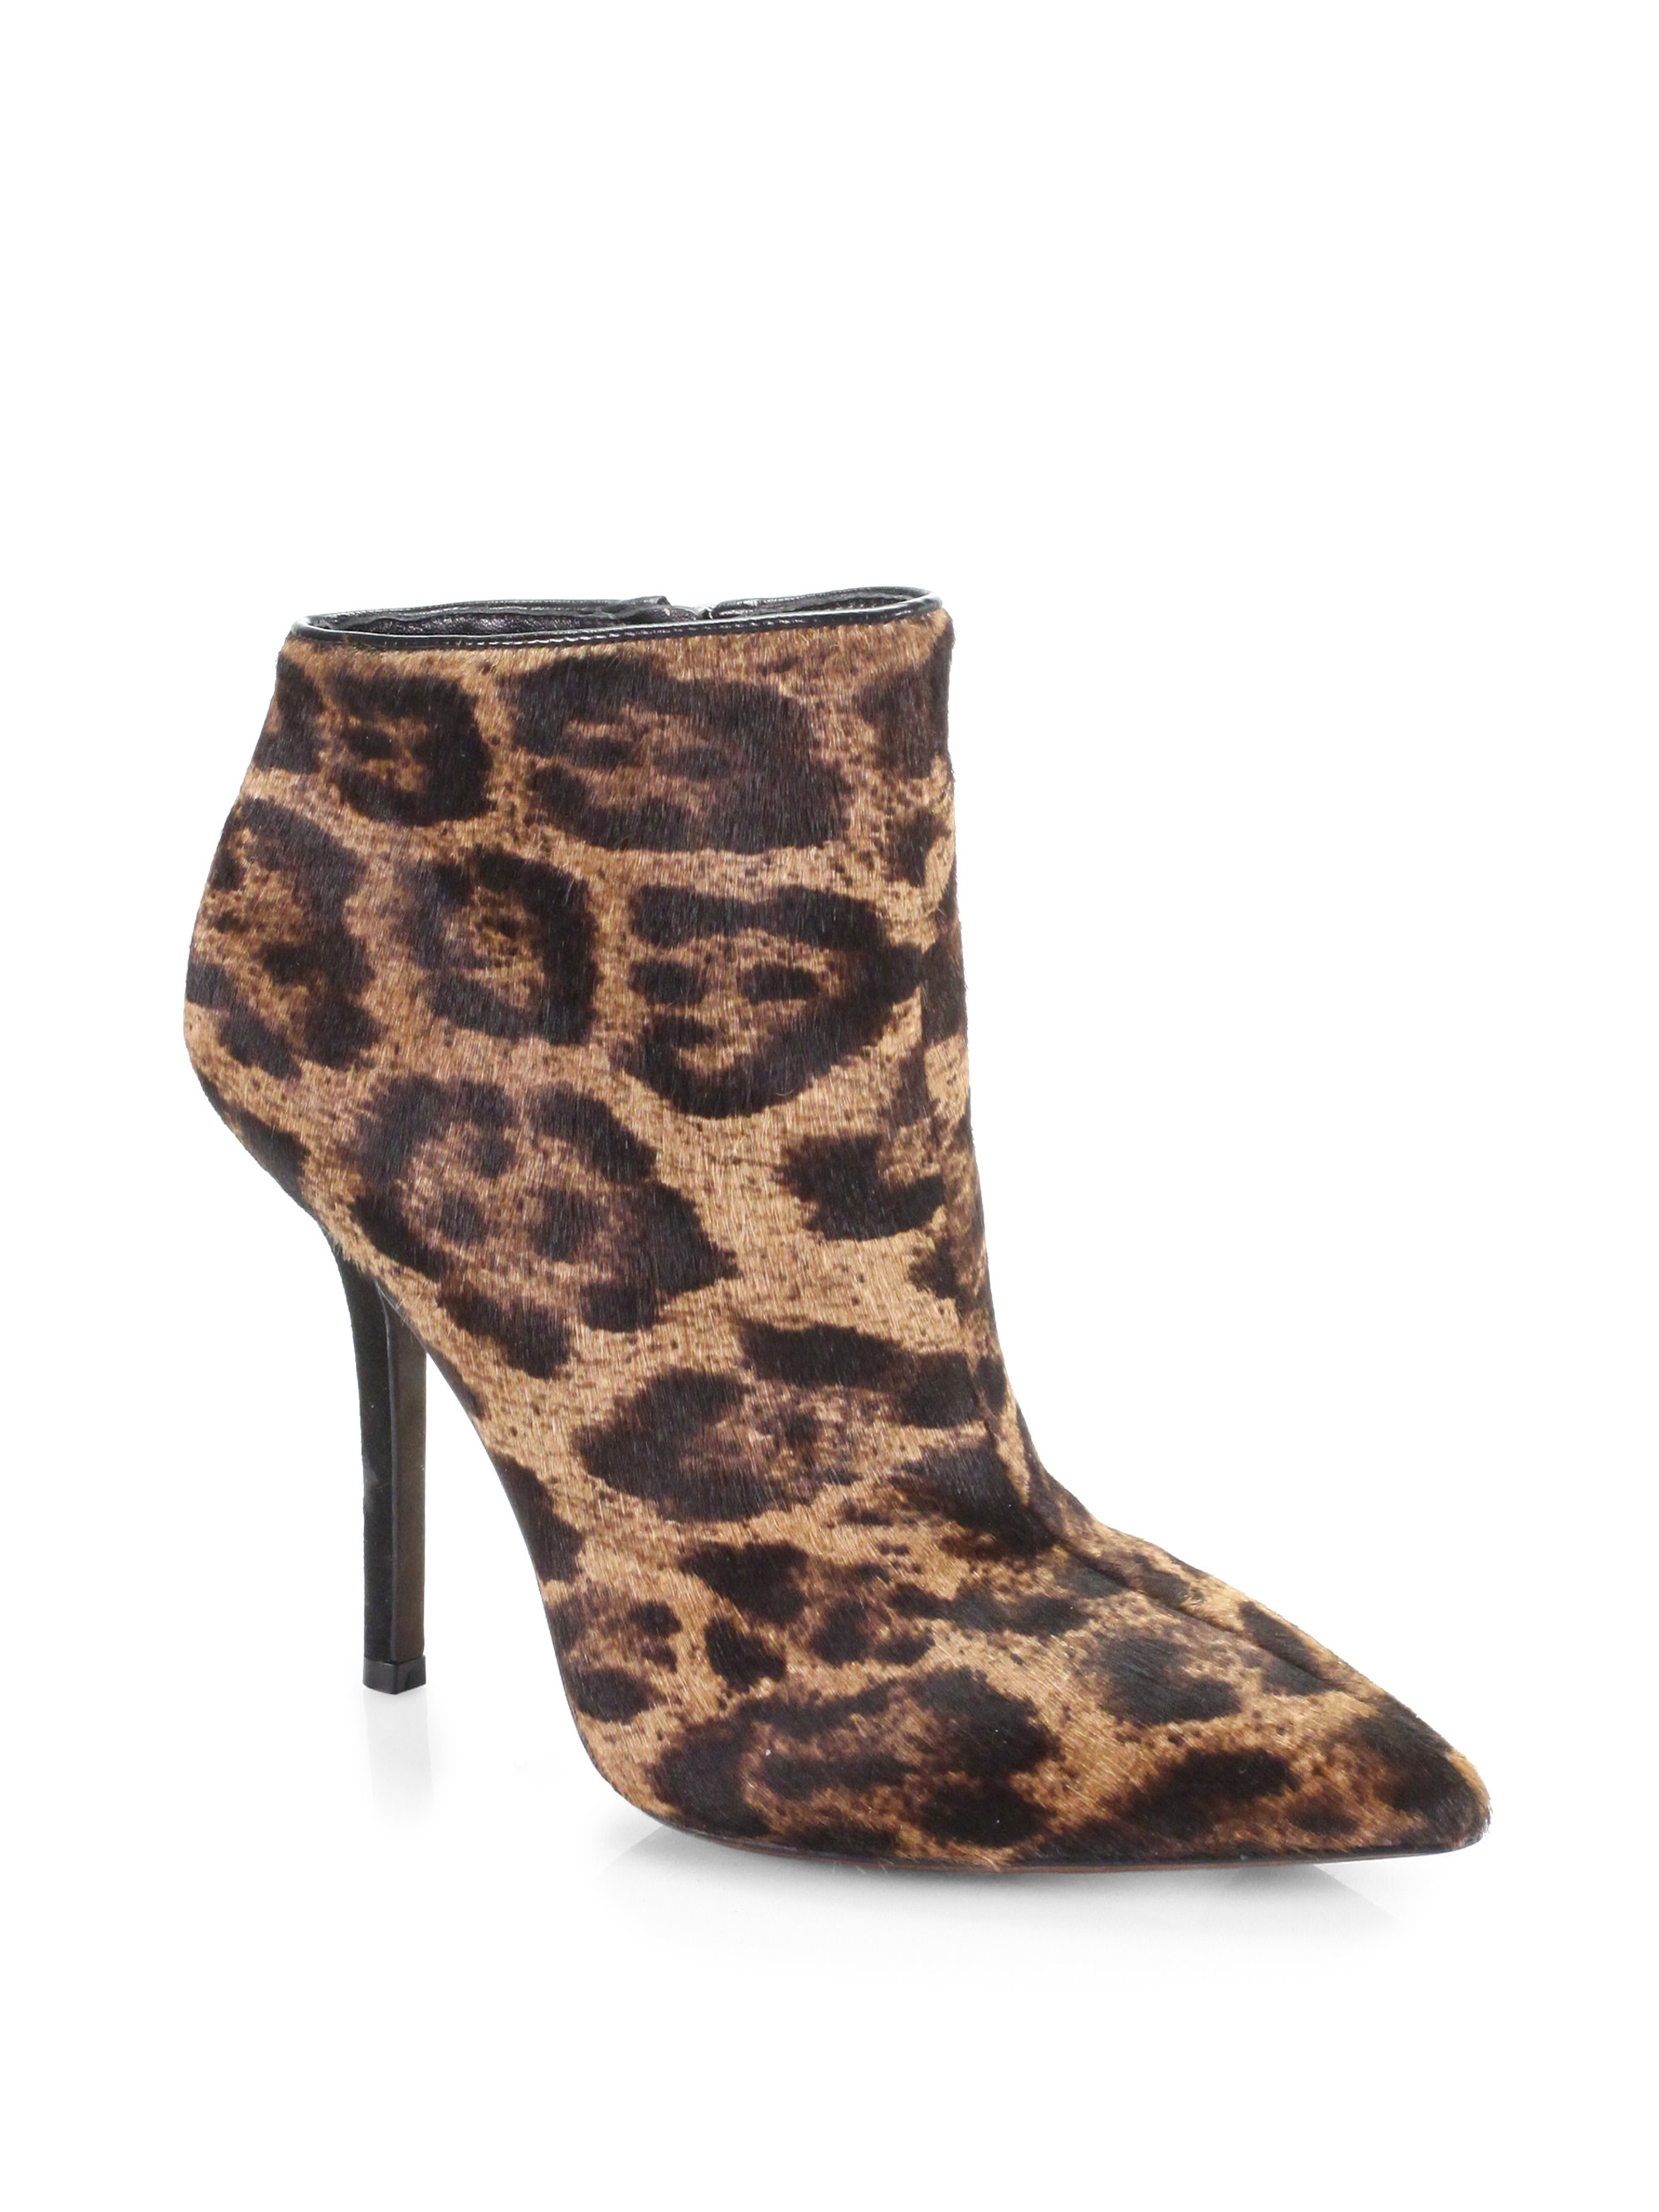 Vera Wang Lavender Biance Leopardprint Pony Hair Suede Ankle Boots in ...